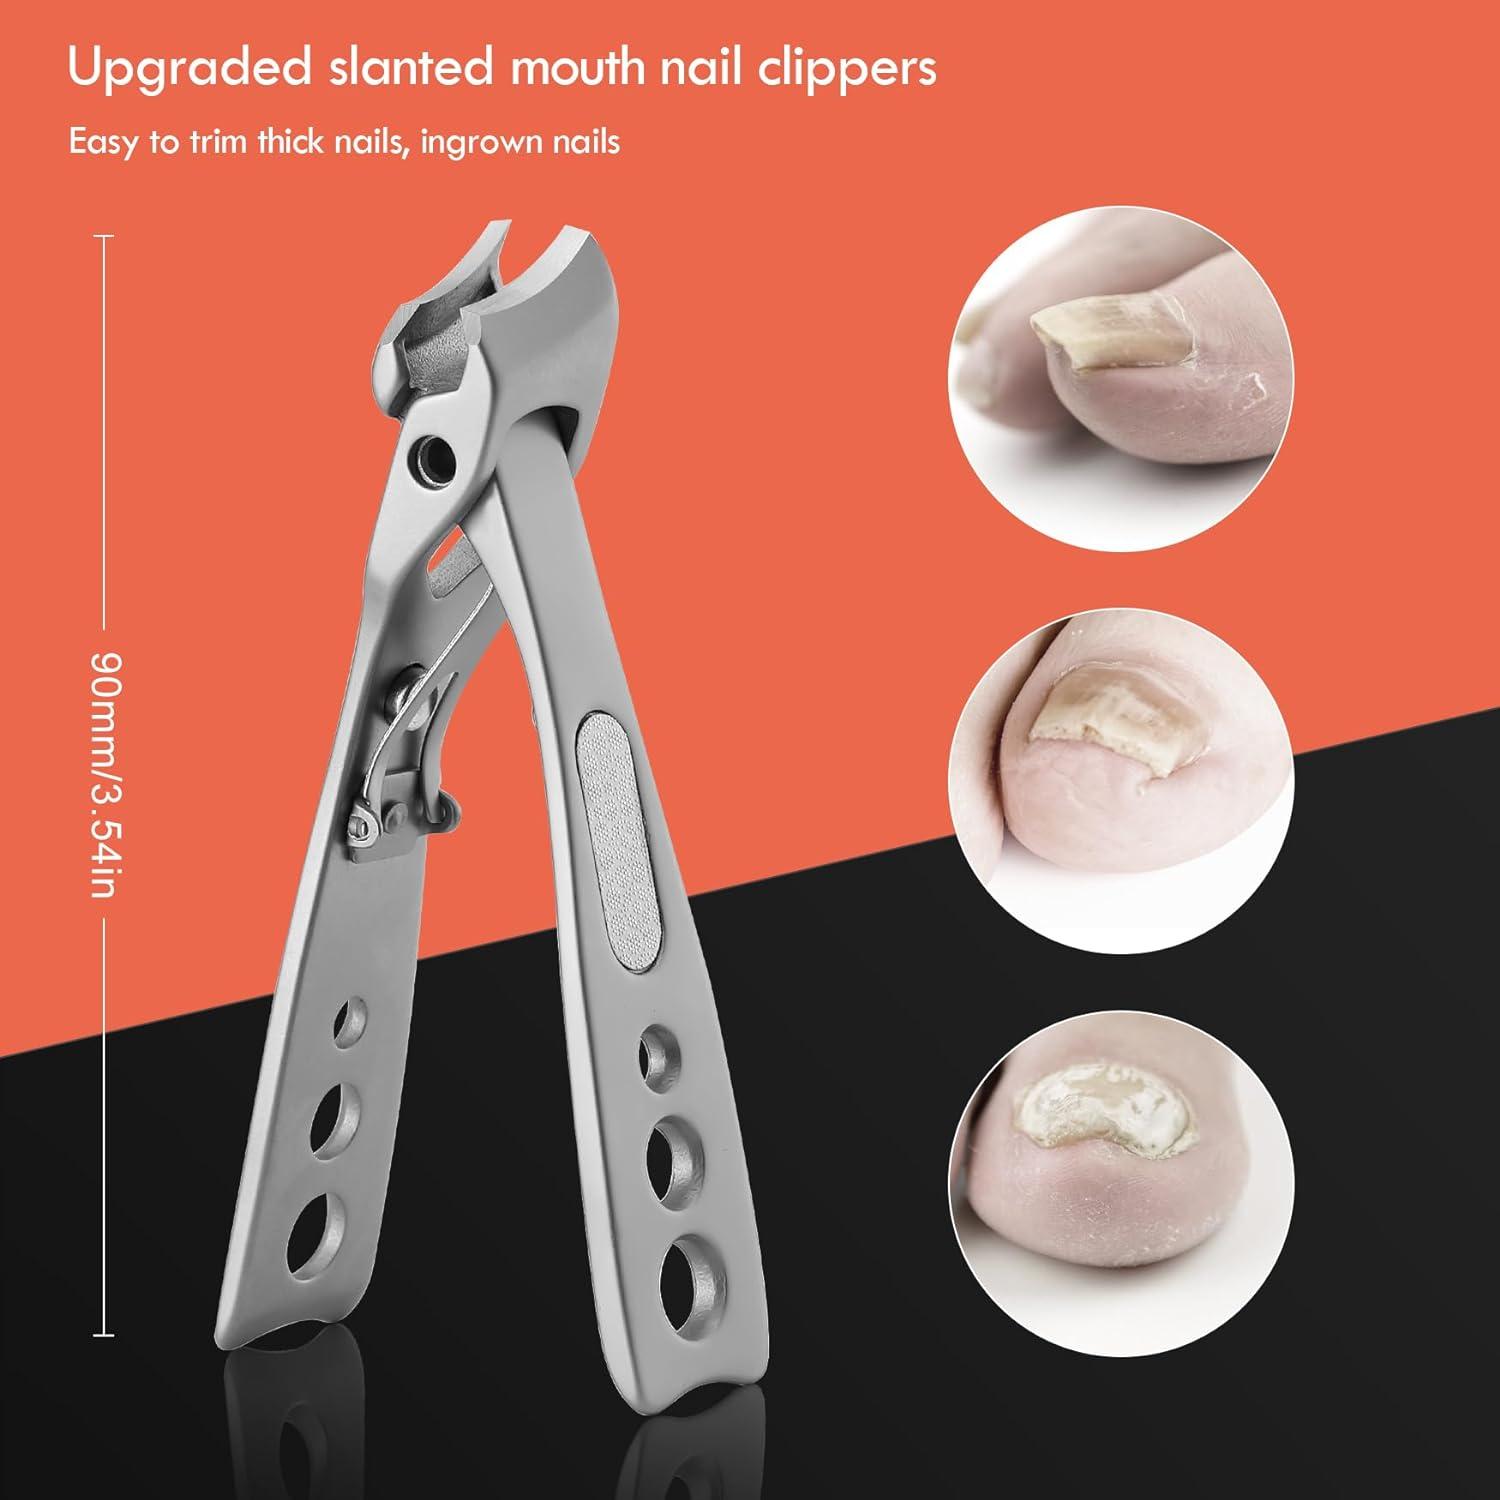 BEZOX Ingrown & Thick Nail Clipper with Slant Curved Blade